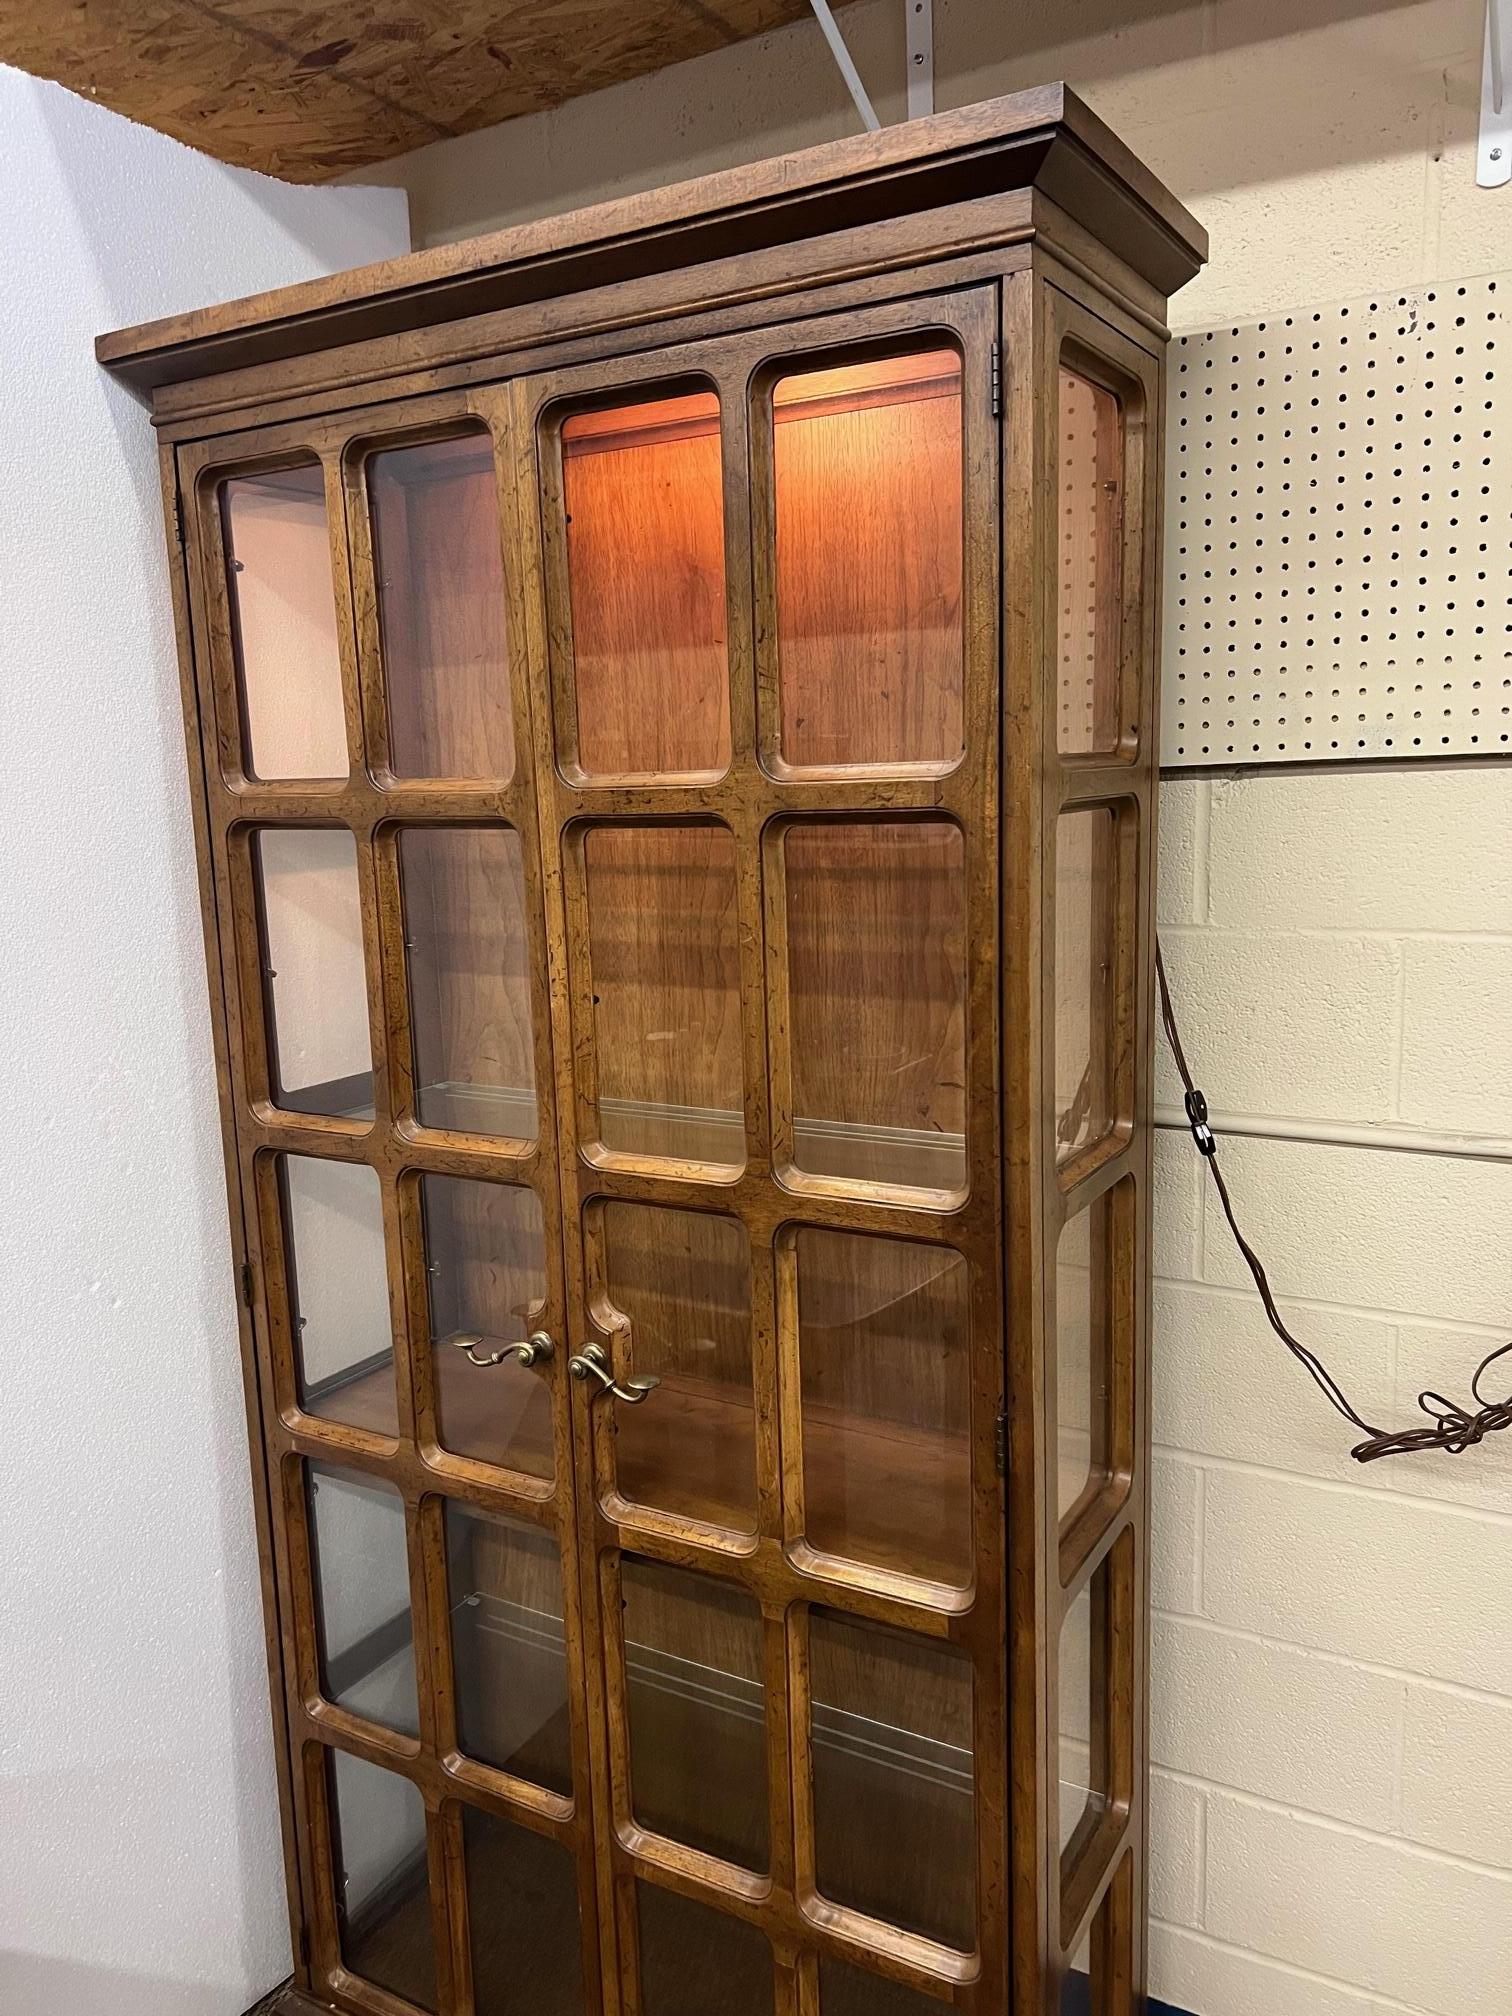 Walnut china display curio cabinet by Drexel. Stamped at the back. Lights at the top and bottom. Top light works. Bottom lights do not currently work. 
Featuring three removable glass shelves and one fixed wood shelf. Minor signs of wear.